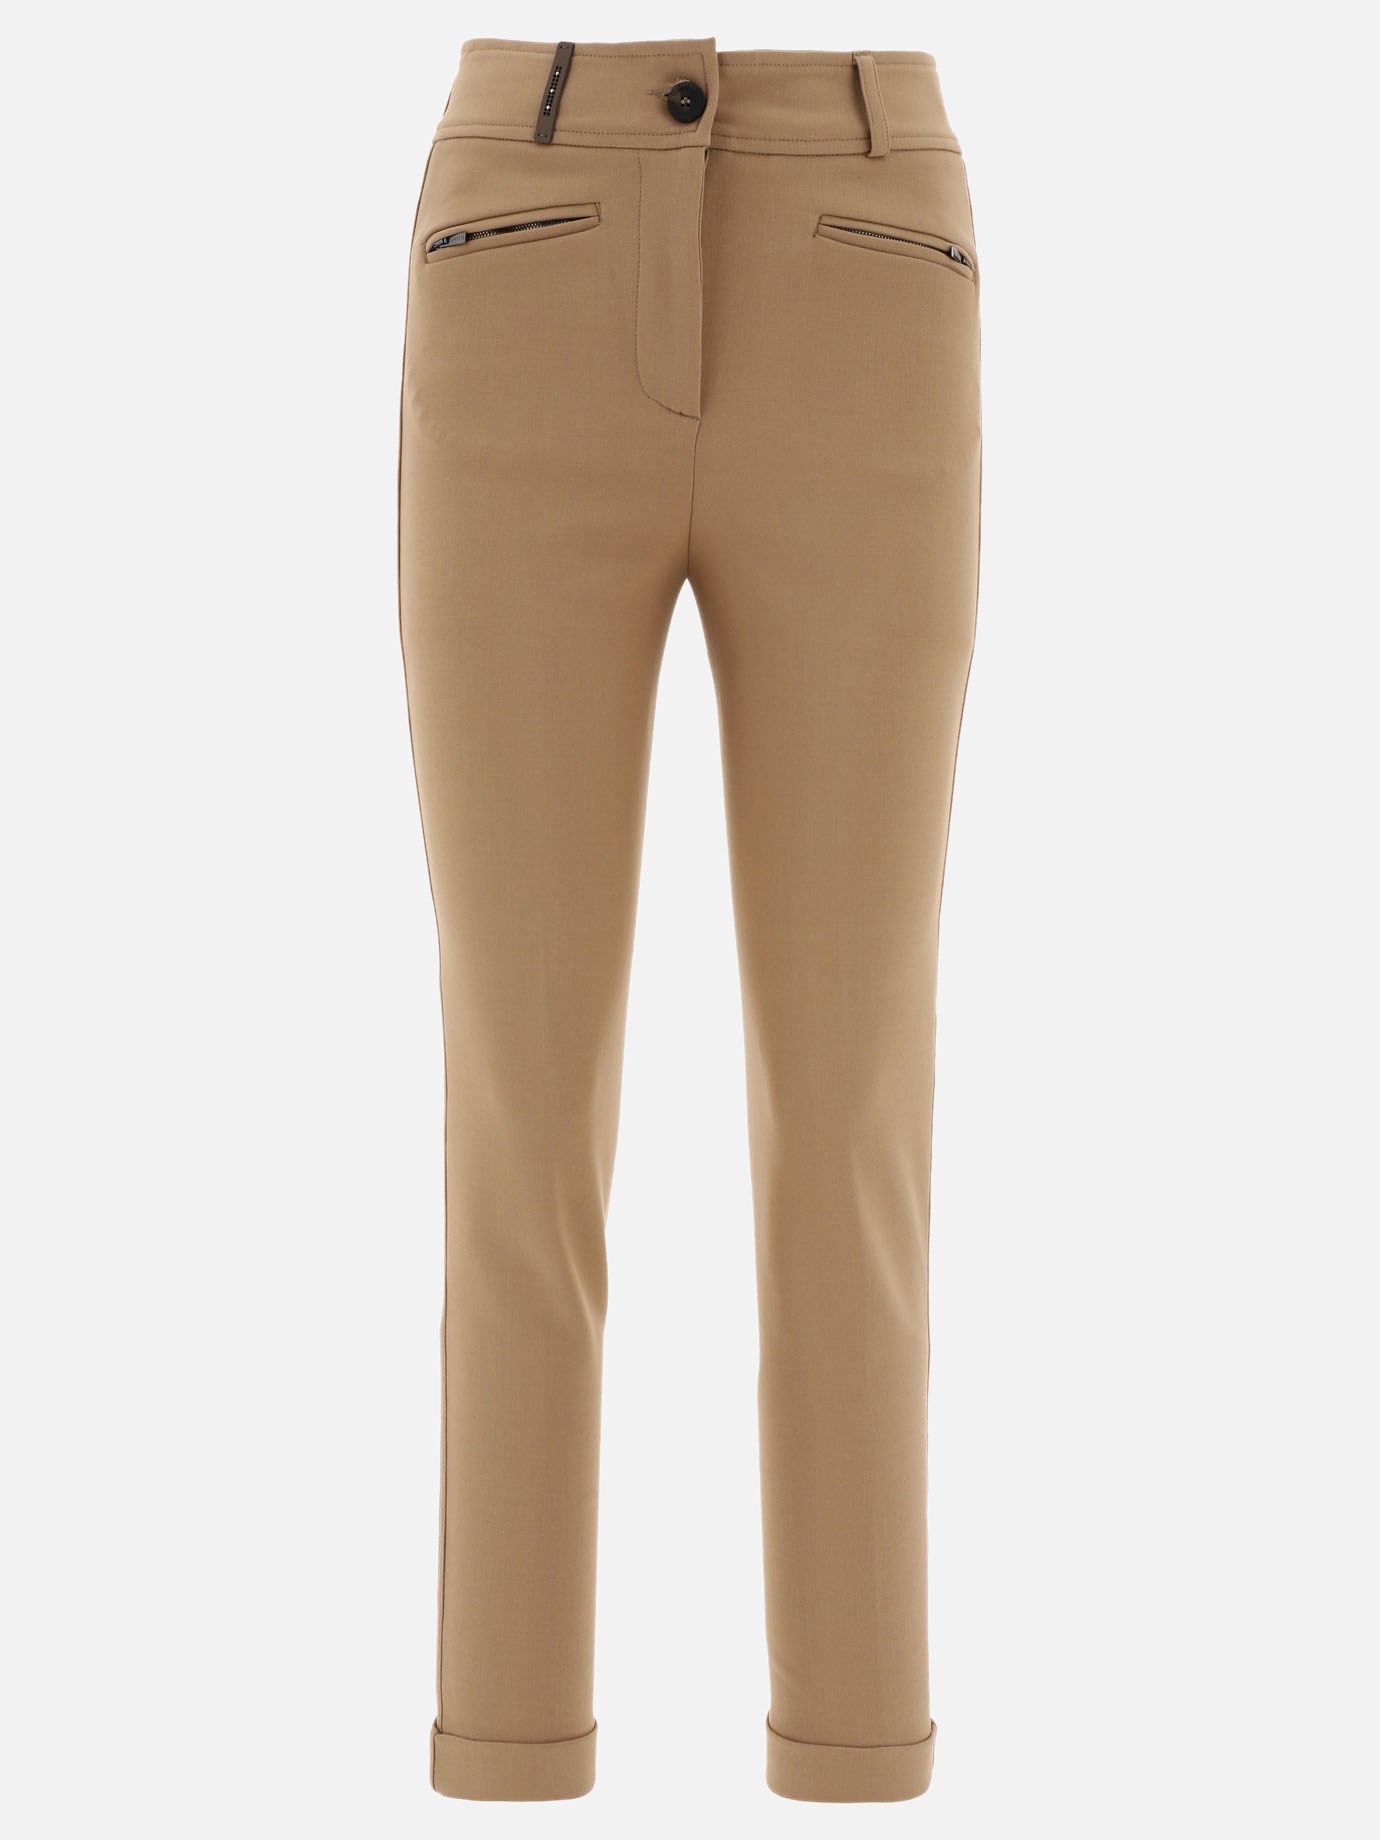 Trousers featuring zipped pocketsby Peserico - 0